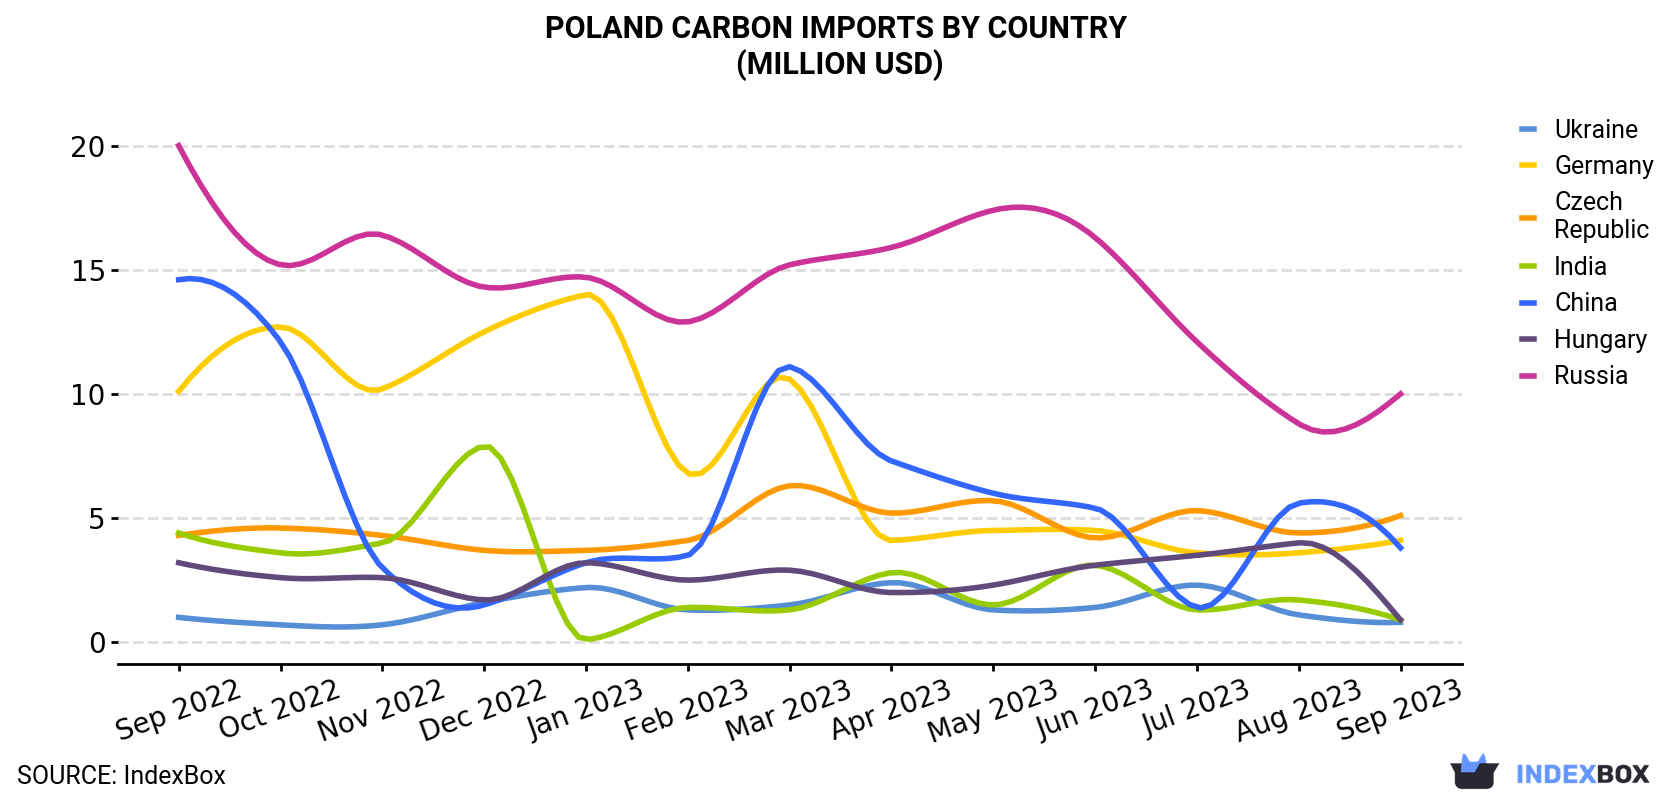 Poland Carbon Imports By Country (Million USD)